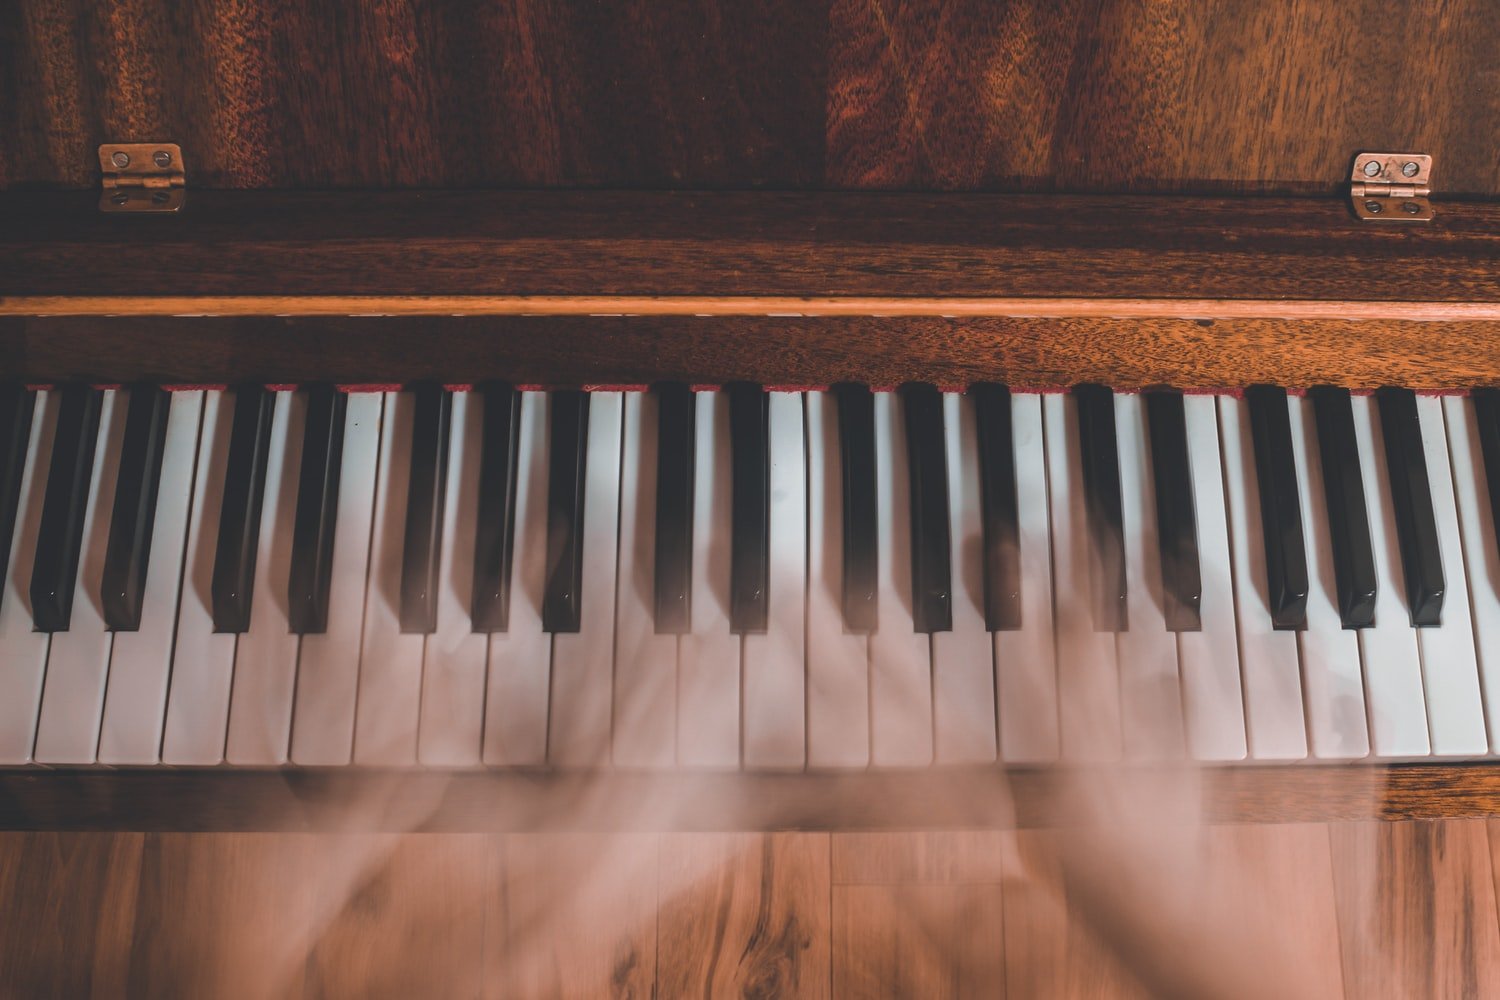 Bird's eye view of piano keyboard in wood finish with blurry hands.